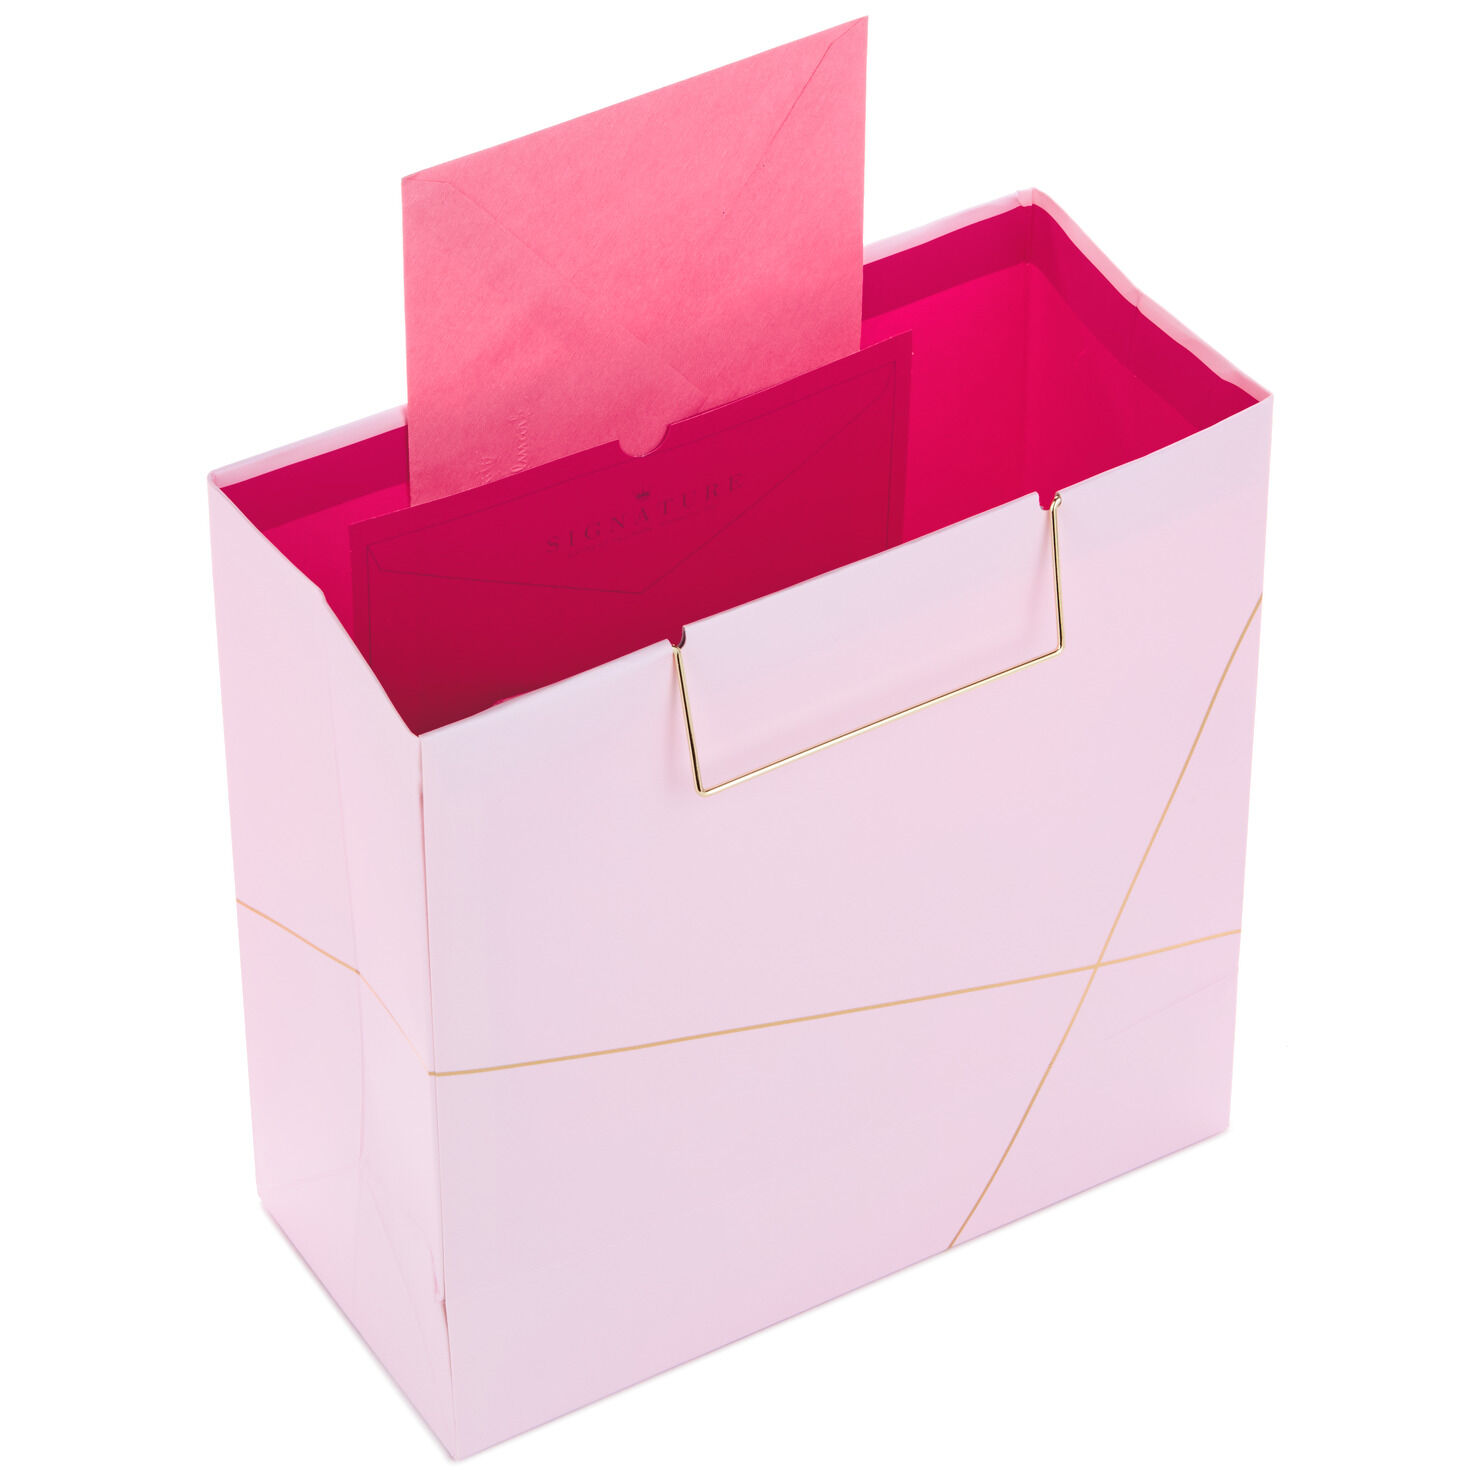 Light Pink With Gold Large Square Gift Bag, 10.4" for only USD 6.99 | Hallmark